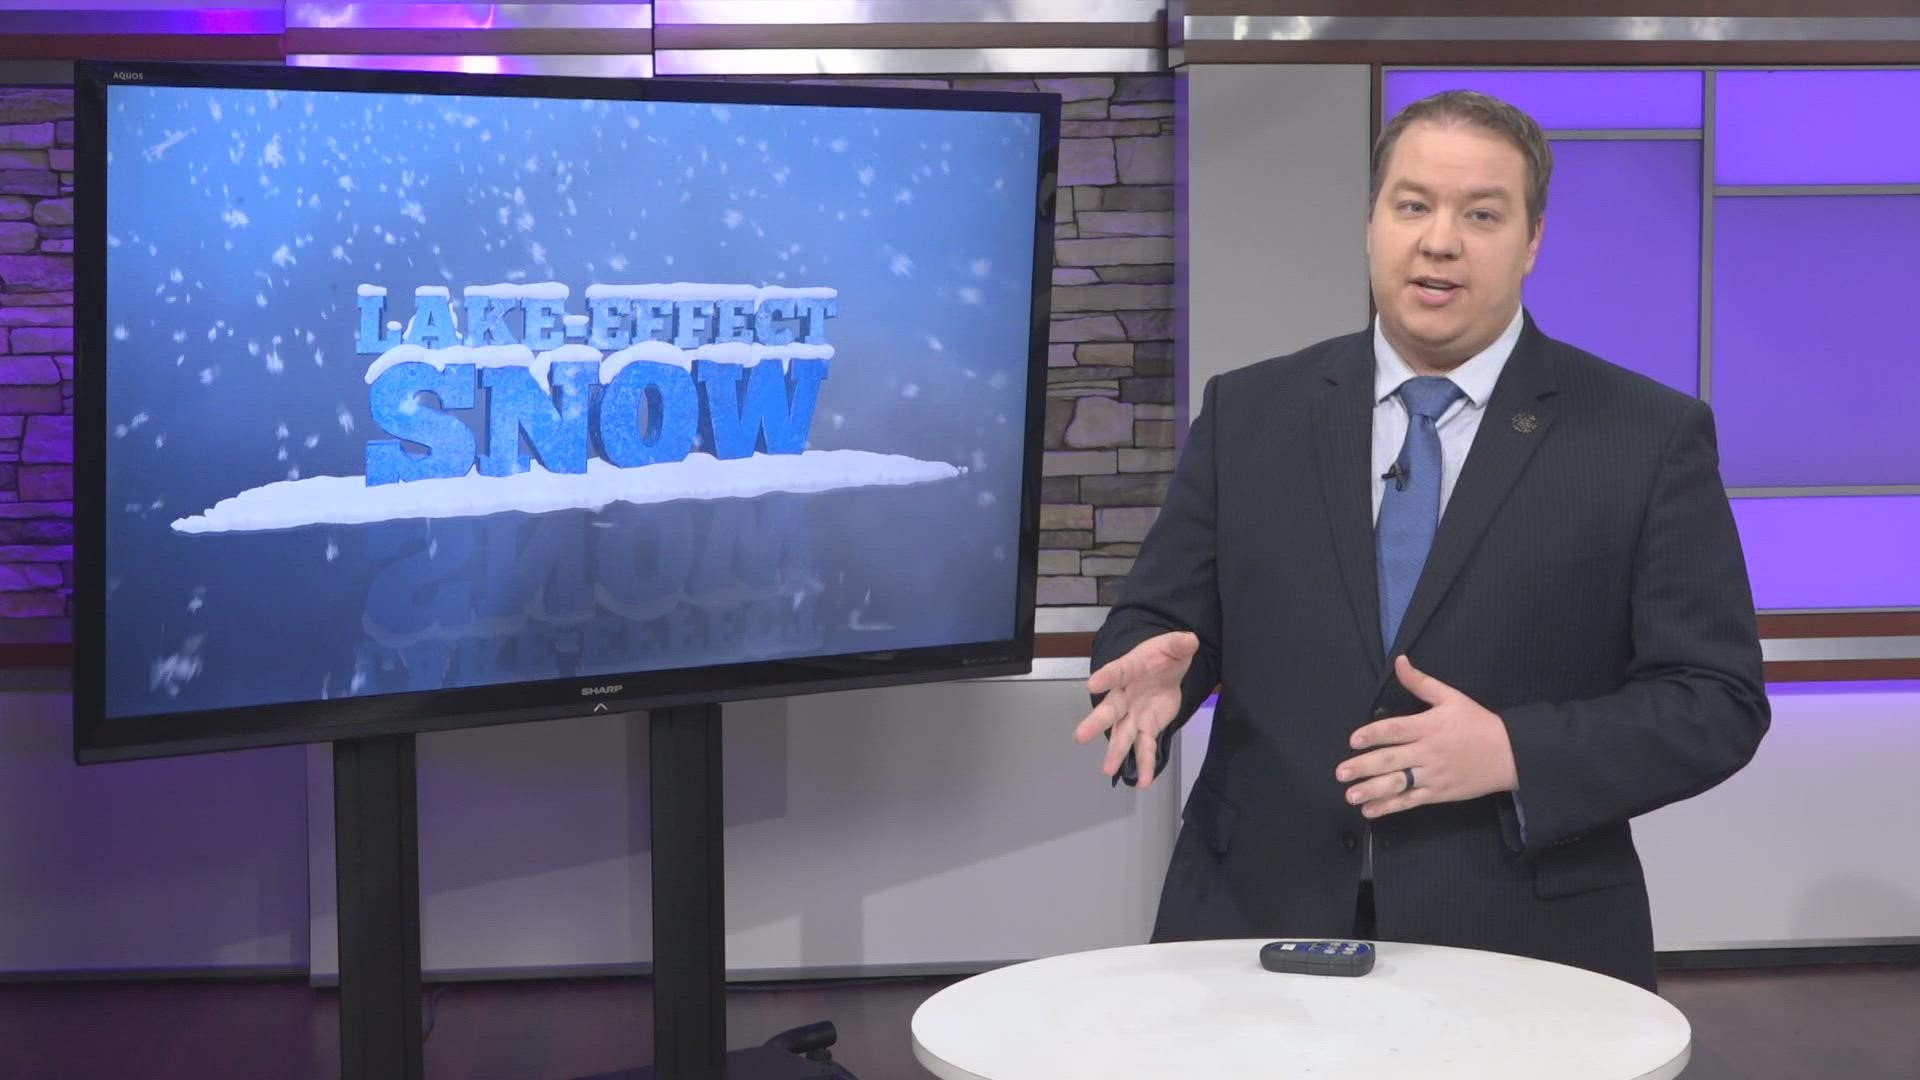 A new study by Dr. Lei Meng from WMU sheds light on the causes for years with higher levels of Lake Effect Snow. Meteorologist Michael Behrens has details!